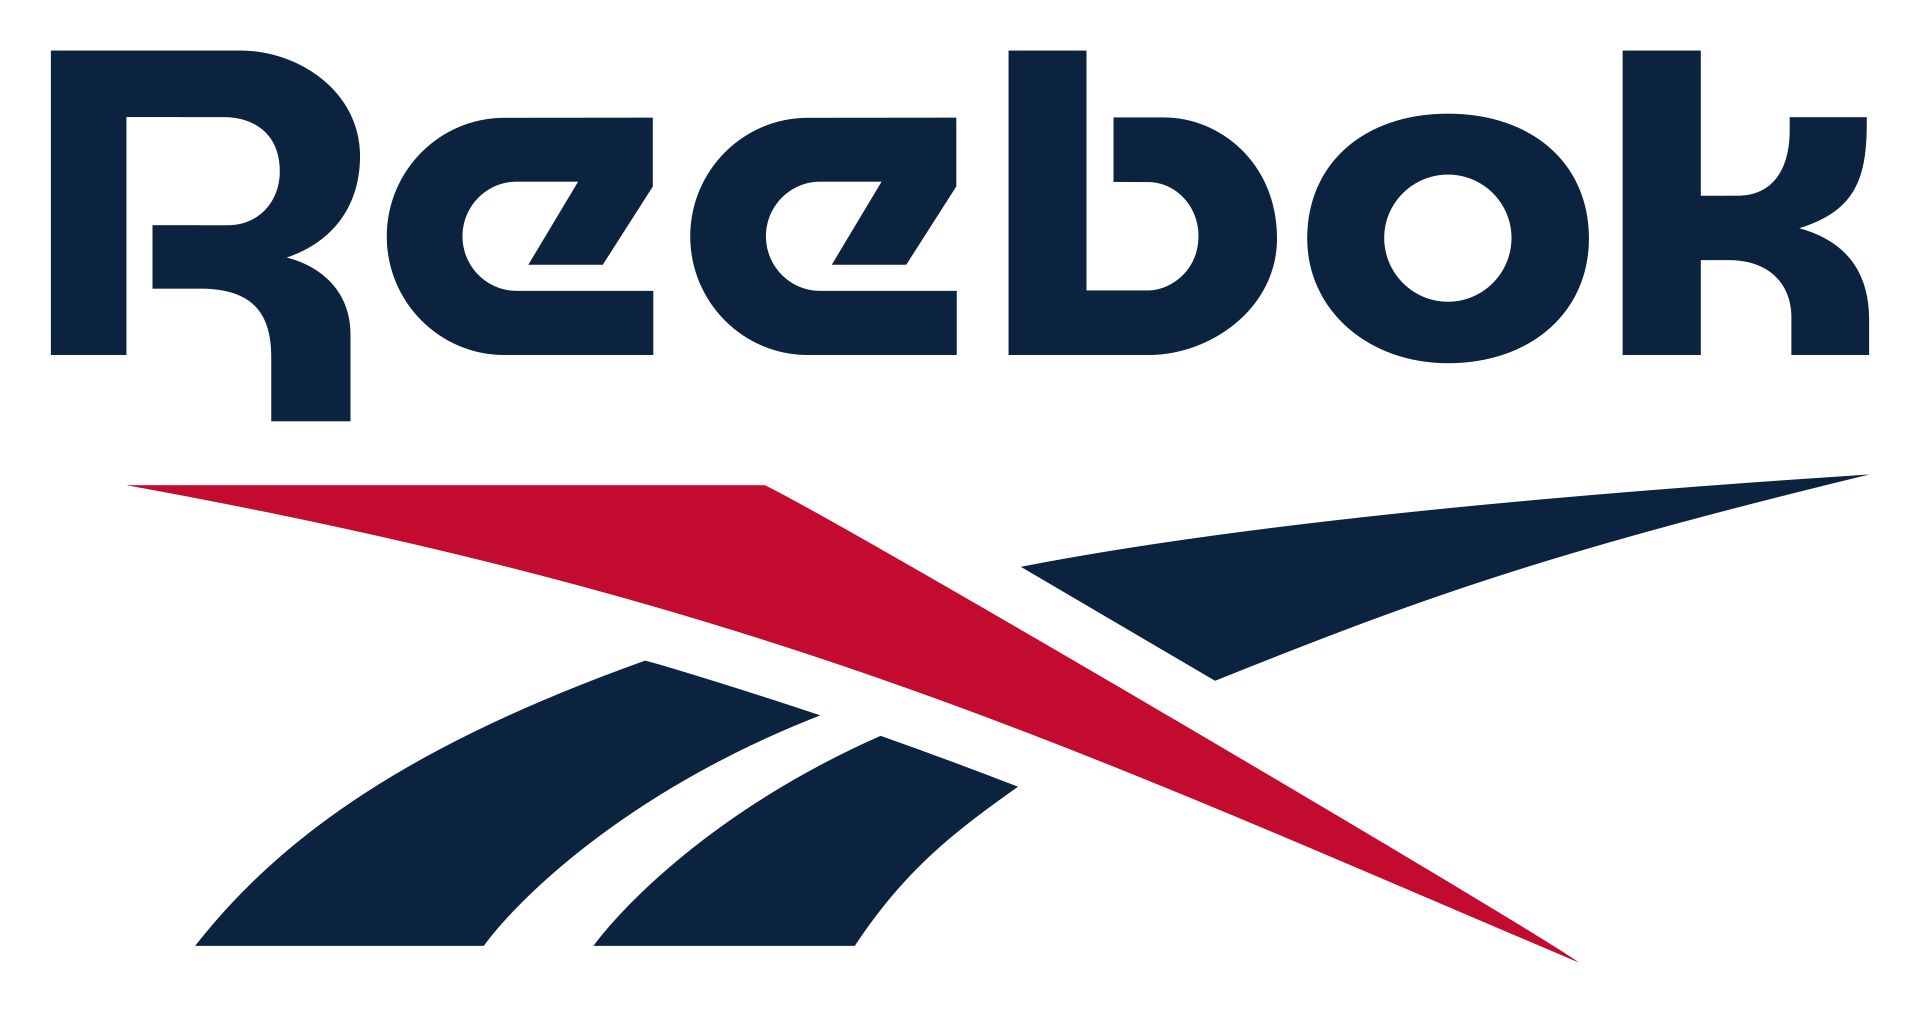 coupons for reebok website